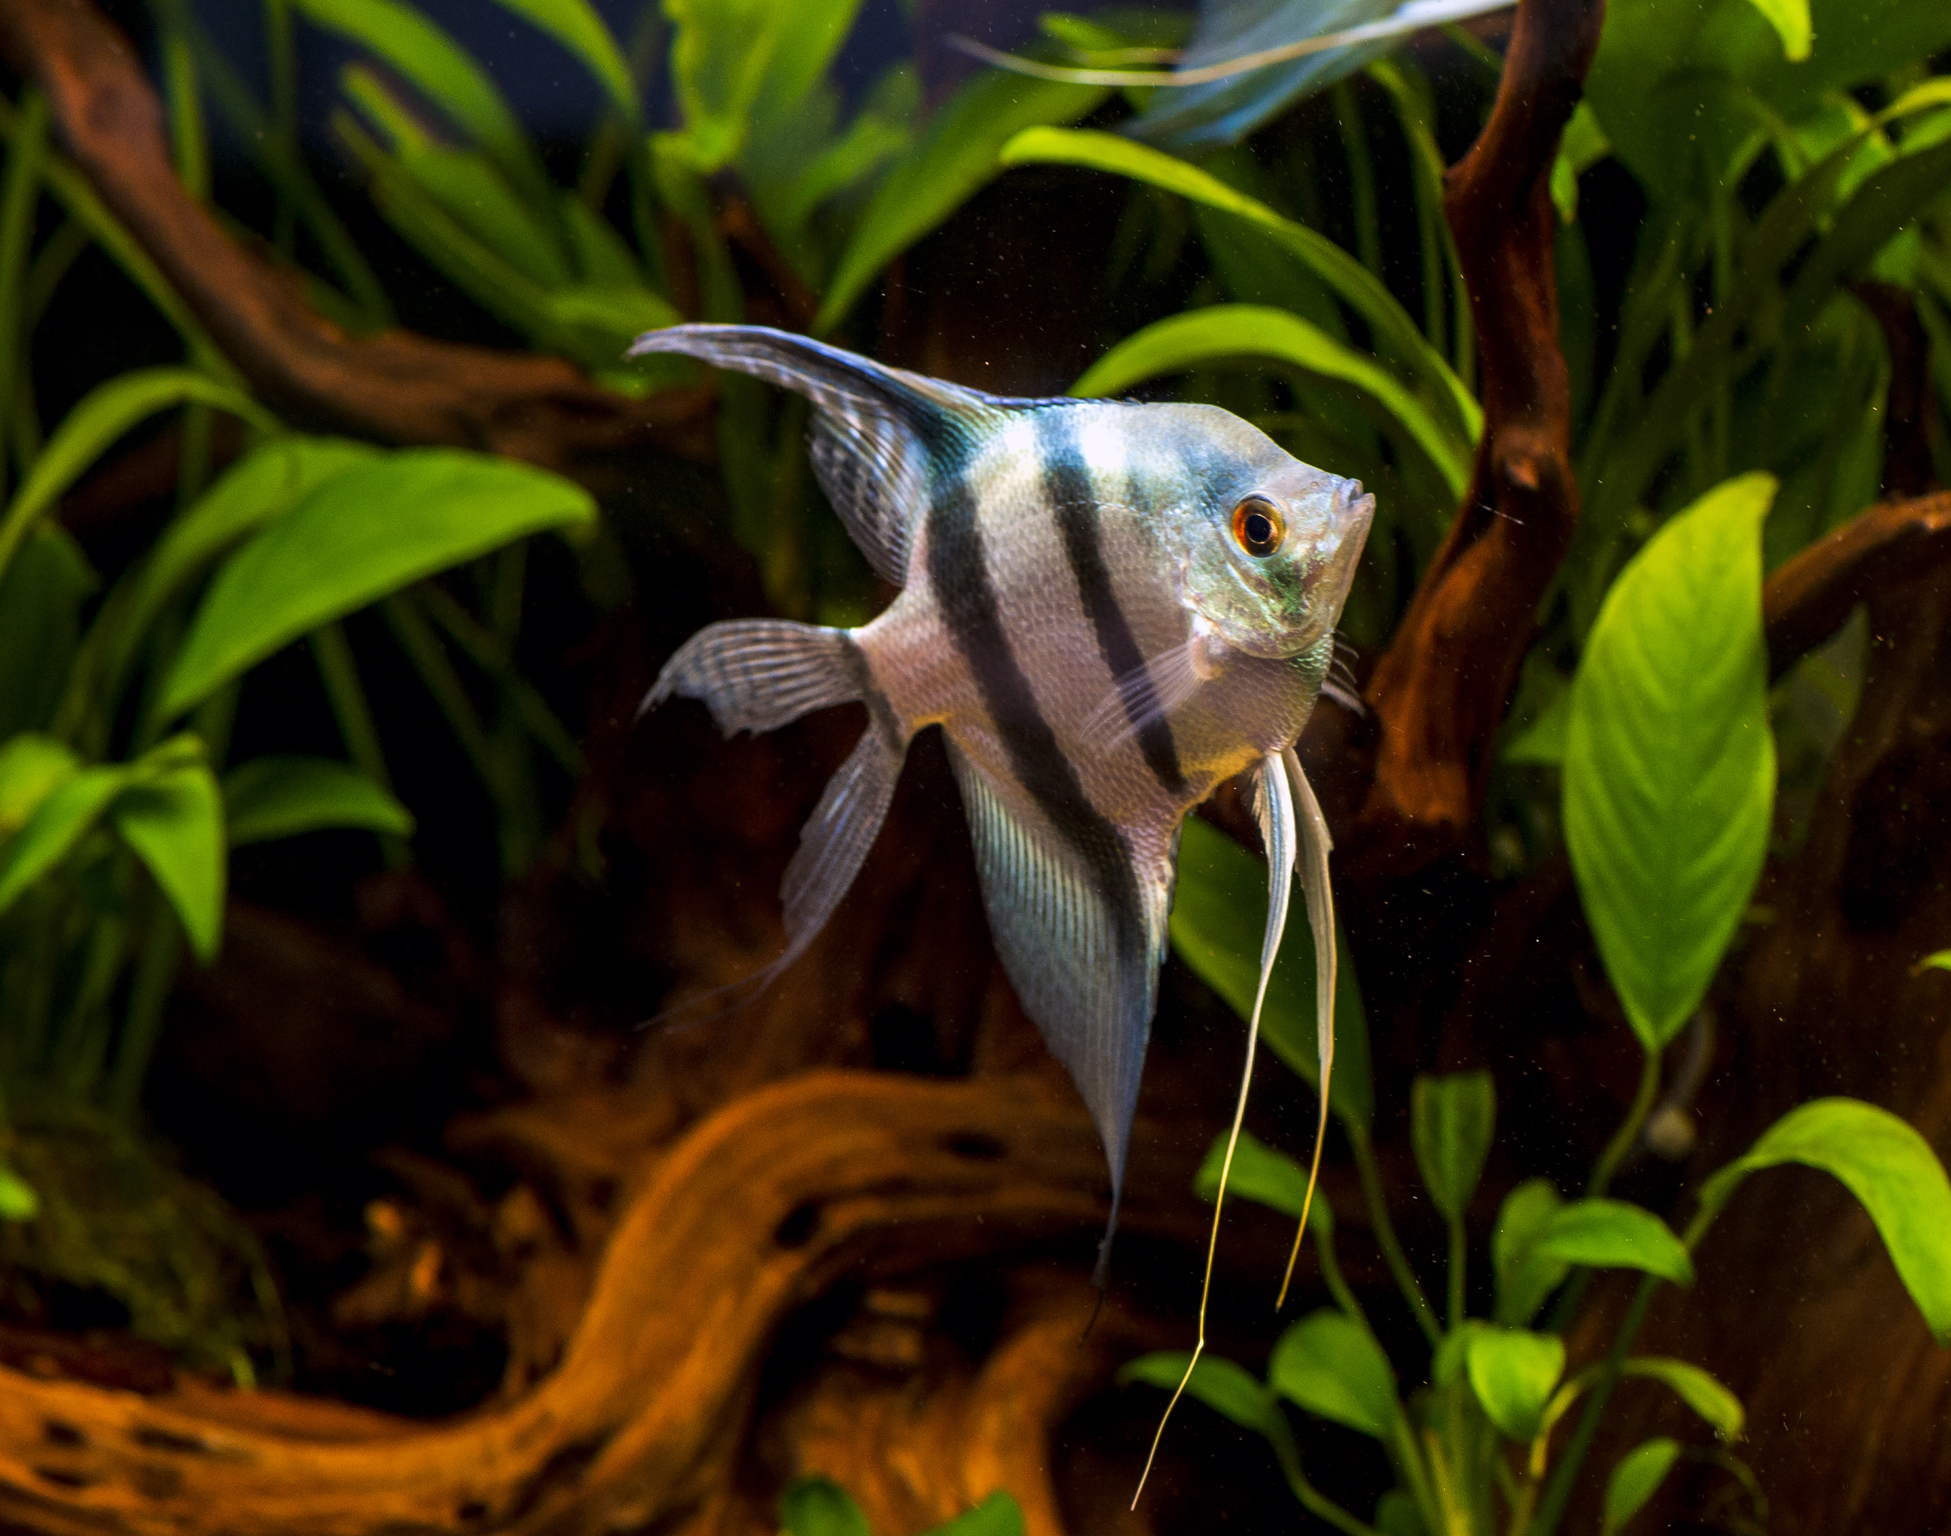 <p>  Have you ever seen a <a href="https://www.lovetoknowpets.com/aquariums/10-facts-about-angelfish" title="10 Fun and Interesting Angelfish Facts">freshwater angelfish</a> in action? They're like the royalty of the fish world, all elegance with their triangle shapes and flowy fins. But they're not just pretty; these guys have personalities that'll totally charm you. </p> <p>  They're curious and love interacting with everything — including us humans! Sure, they need a bit of special care, like roomy tanks and the right water vibes. But trust me, seeing them thrive is totally worth it. If you want a fish with flair and spunk, angelfish are where it's at. </p>